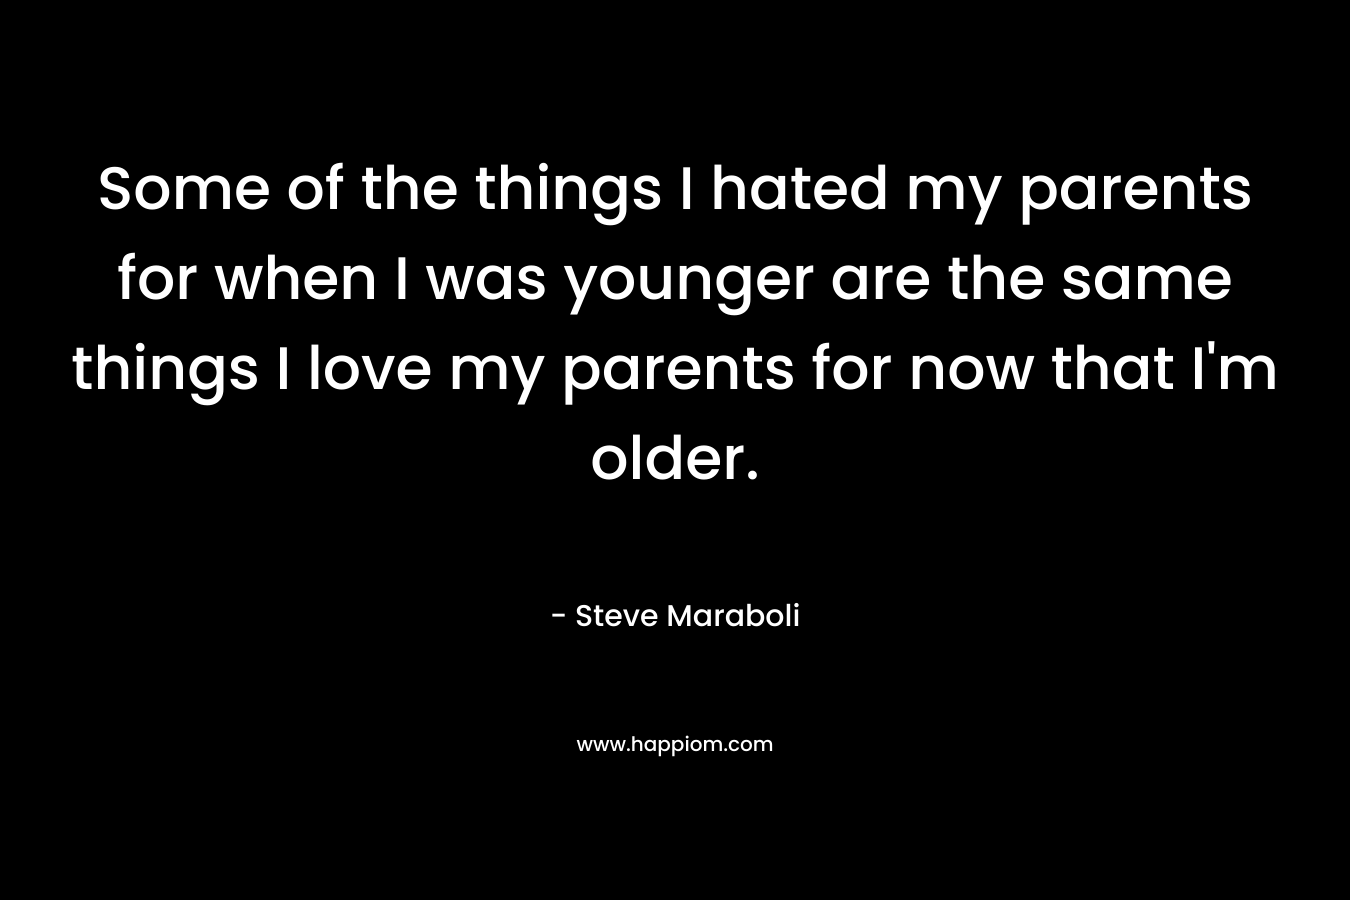 Some of the things I hated my parents for when I was younger are the same things I love my parents for now that I’m older. – Steve Maraboli